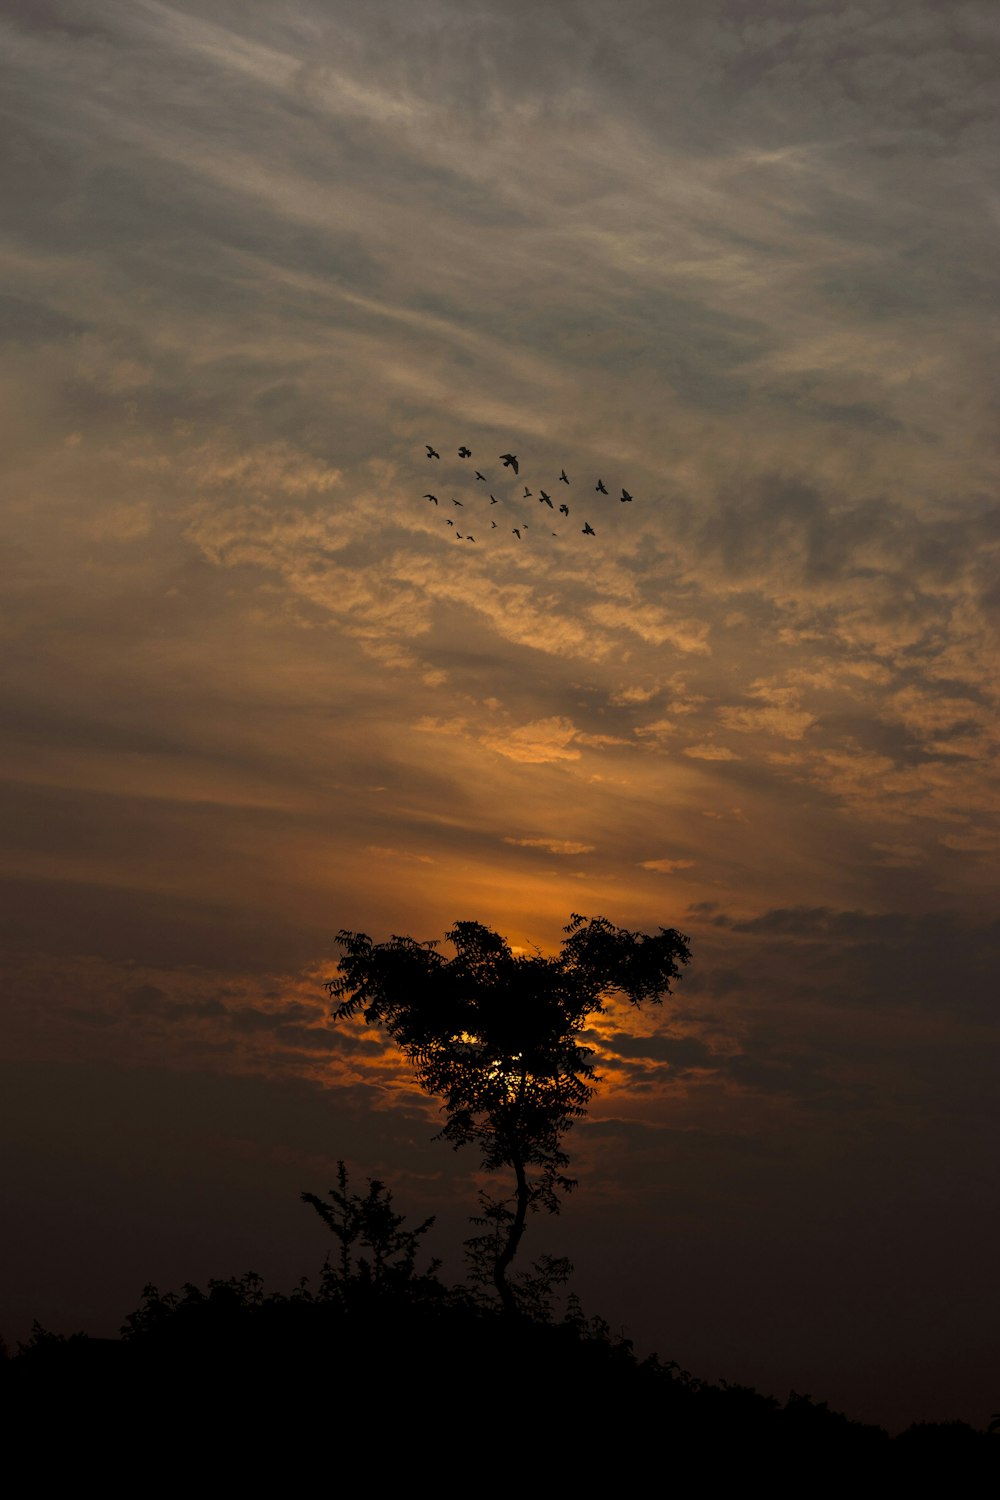 a flock of birds flying over a tree at sunset